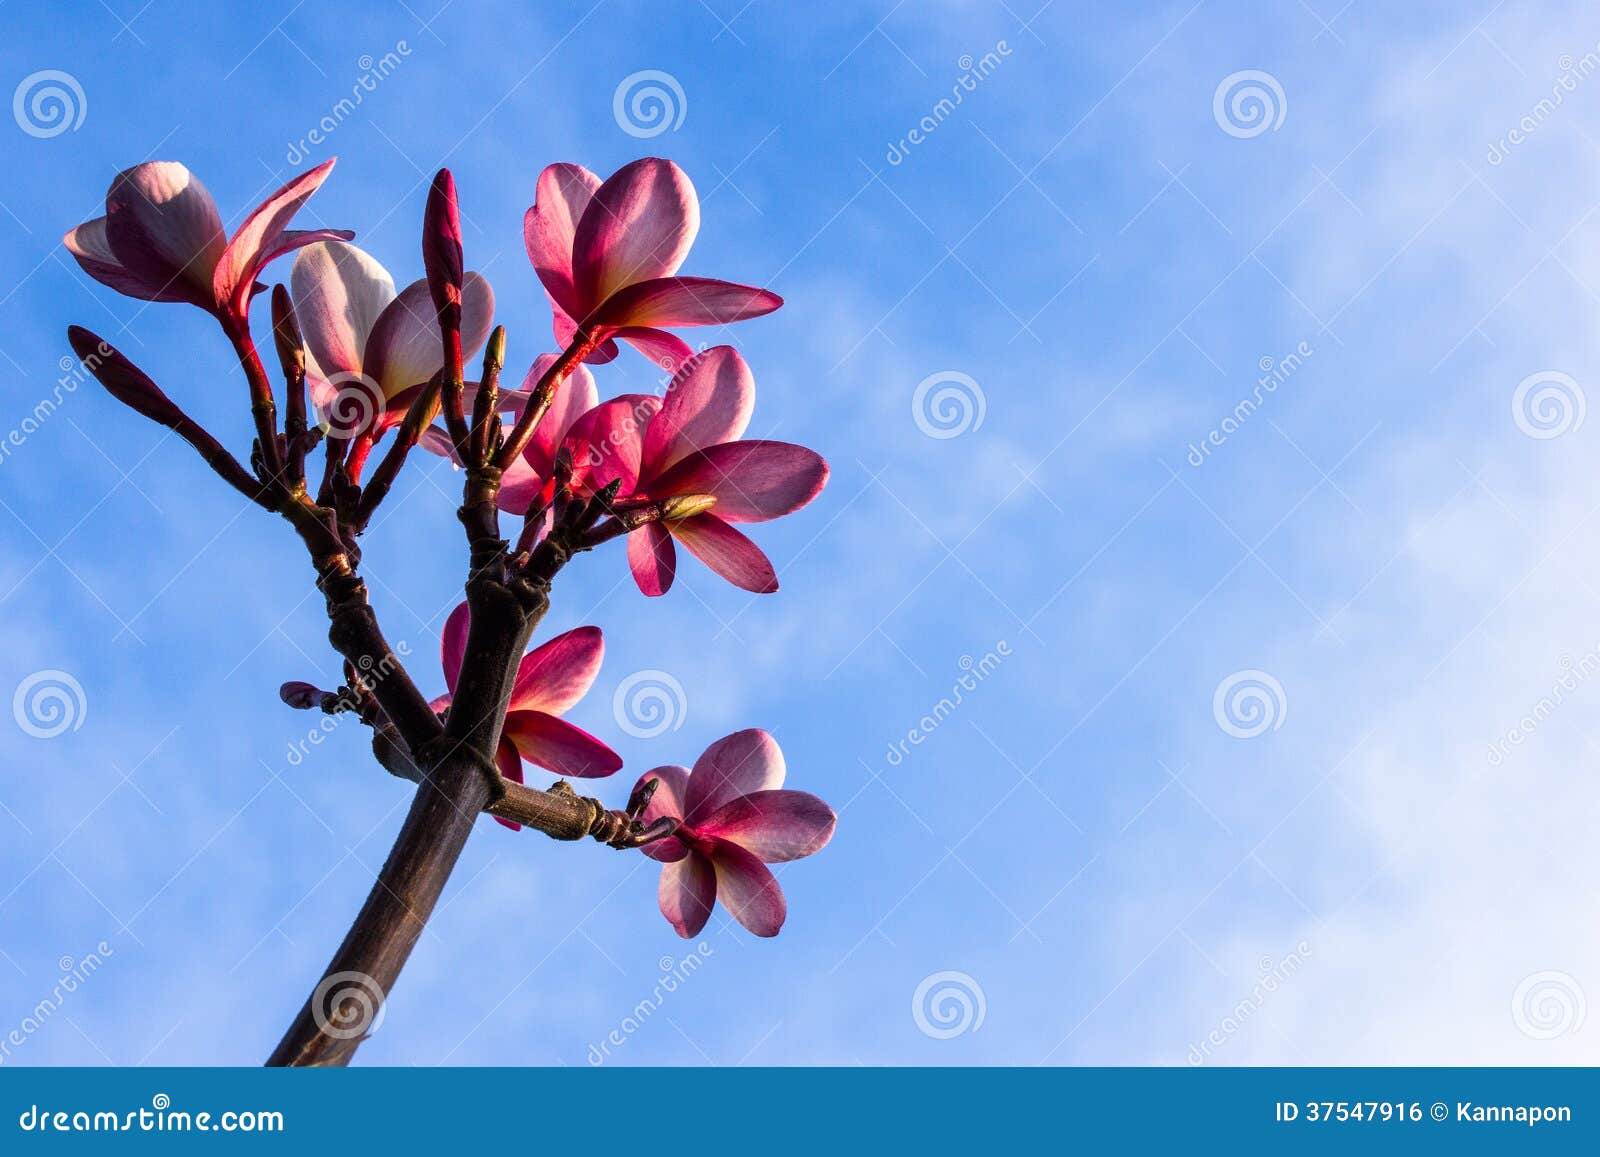 Plumeria Flowers on Blue Sky Stock Photo - Image of healthy, natural ...